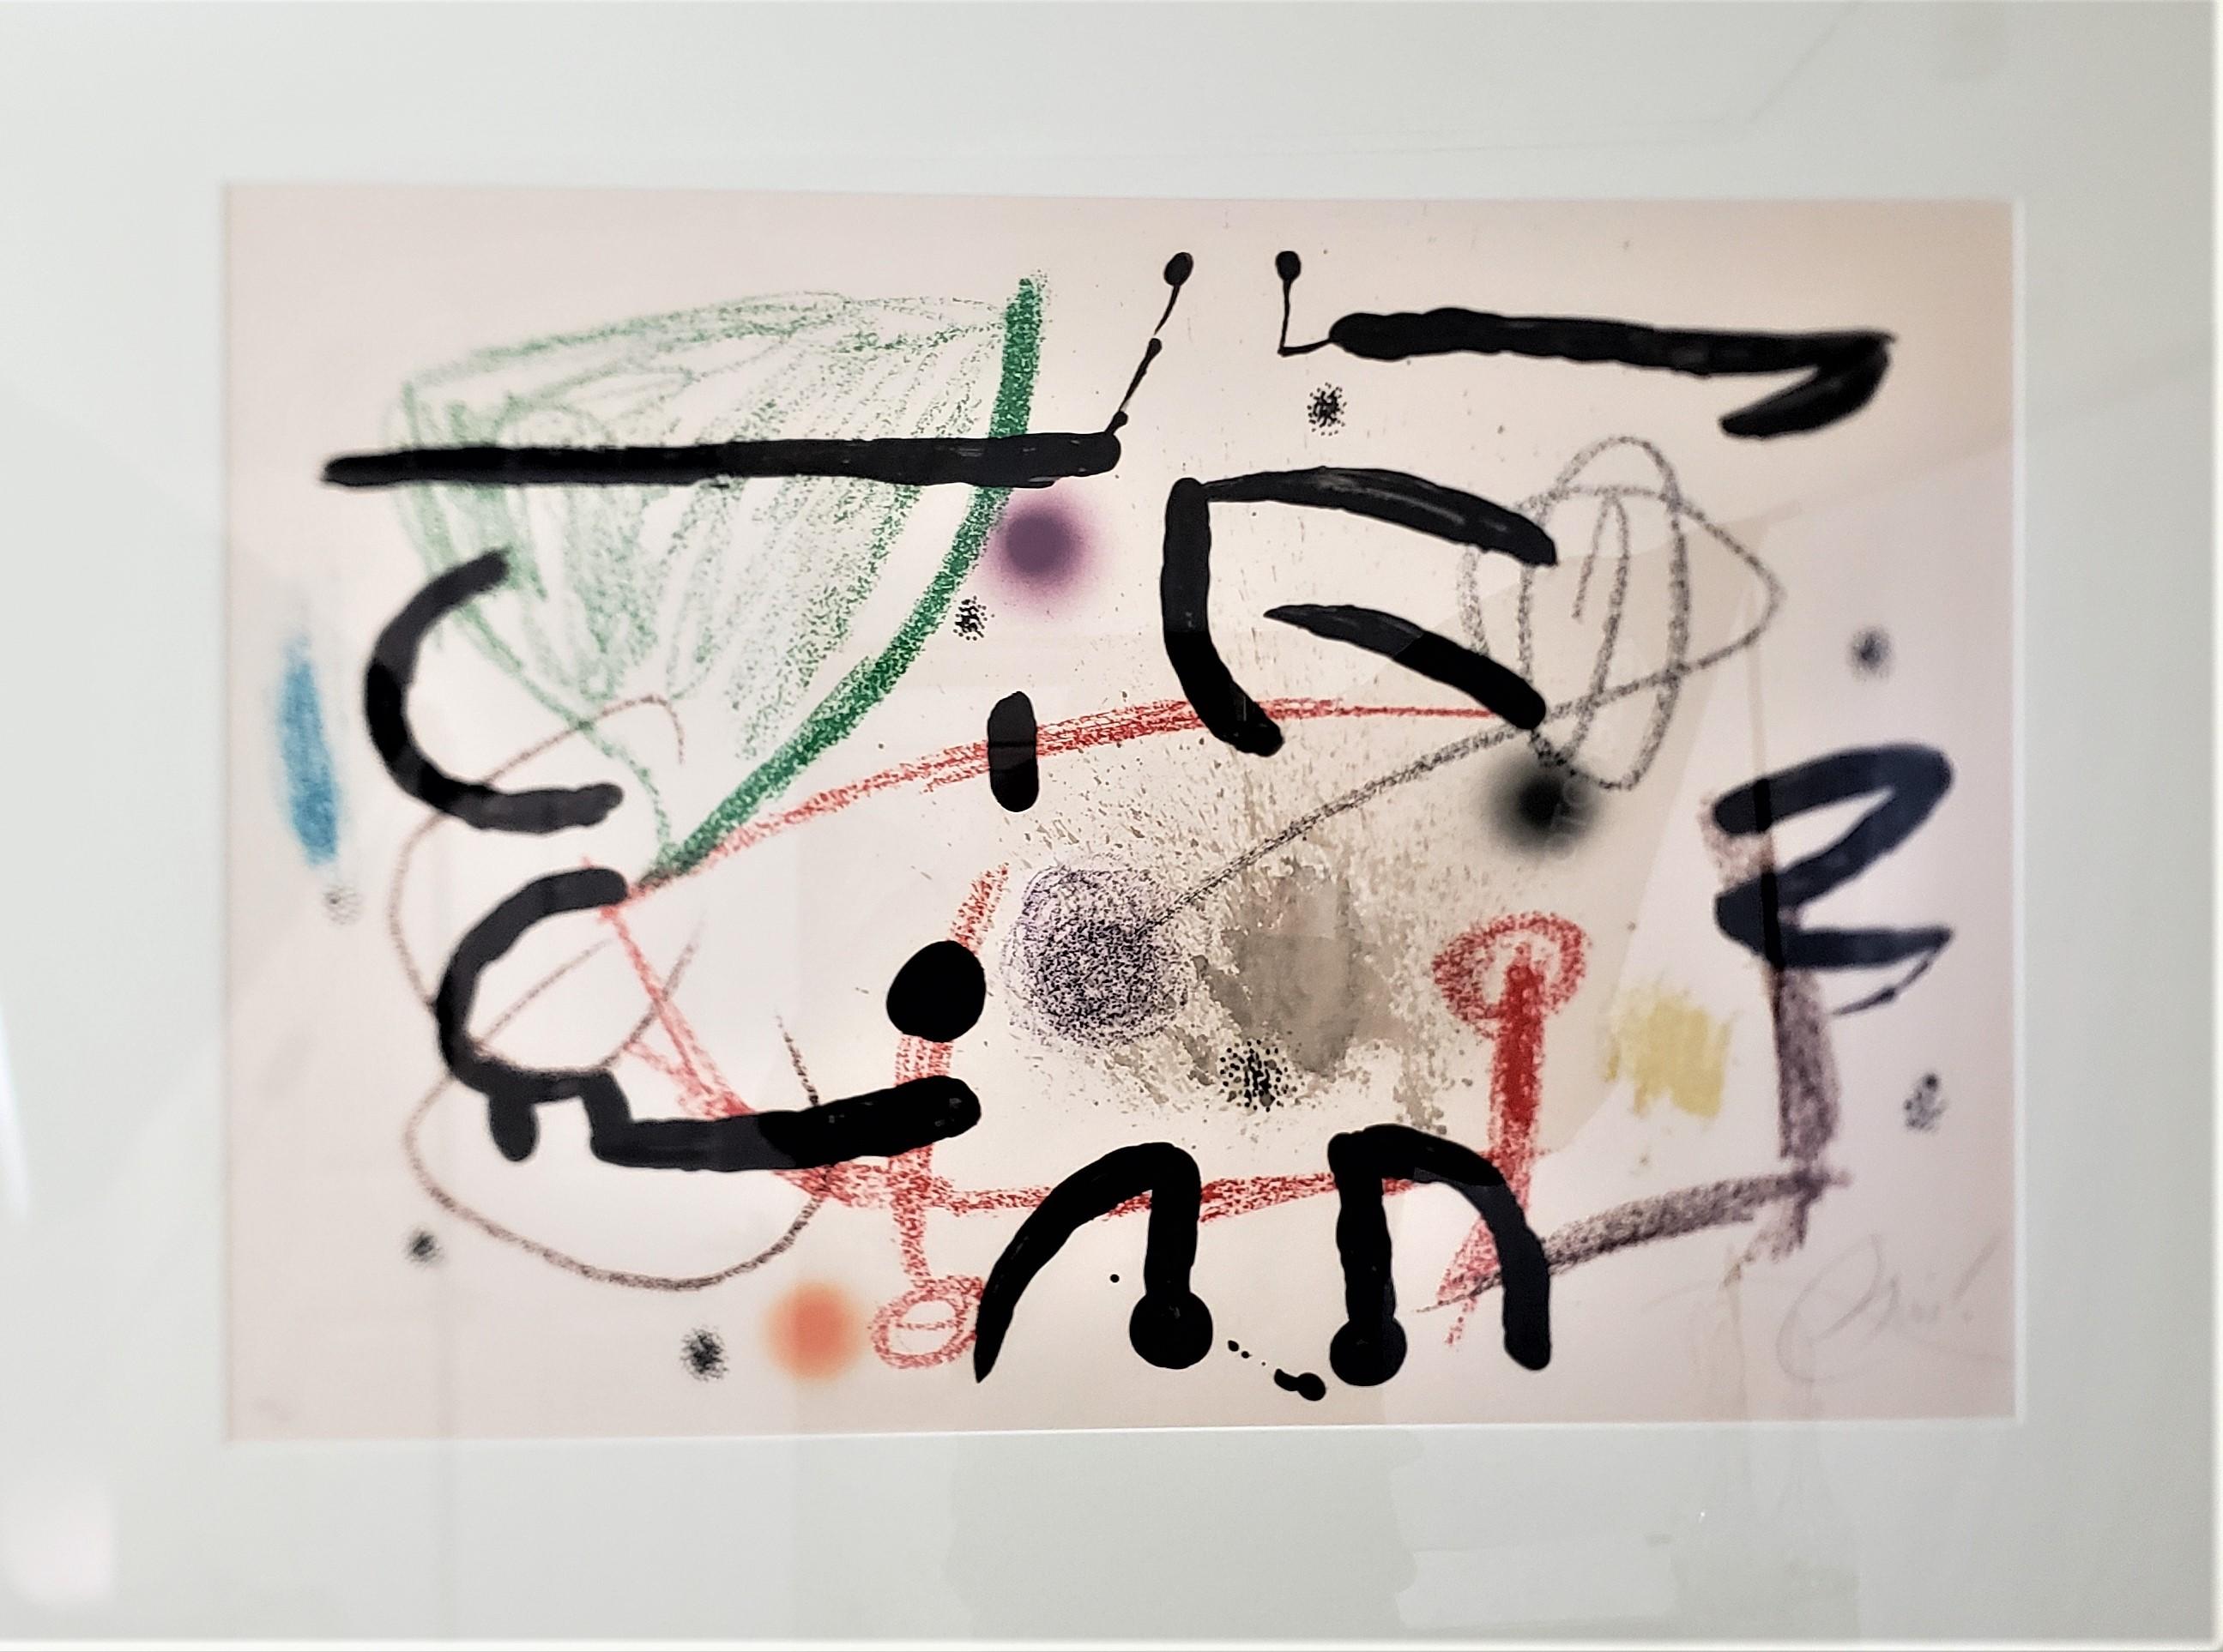 This signed and numbered lithograph was done by the renowned Joan Miro of Spain, and dates to 1975 and done in his Abstract Modernist style. This large lithograph is titled 